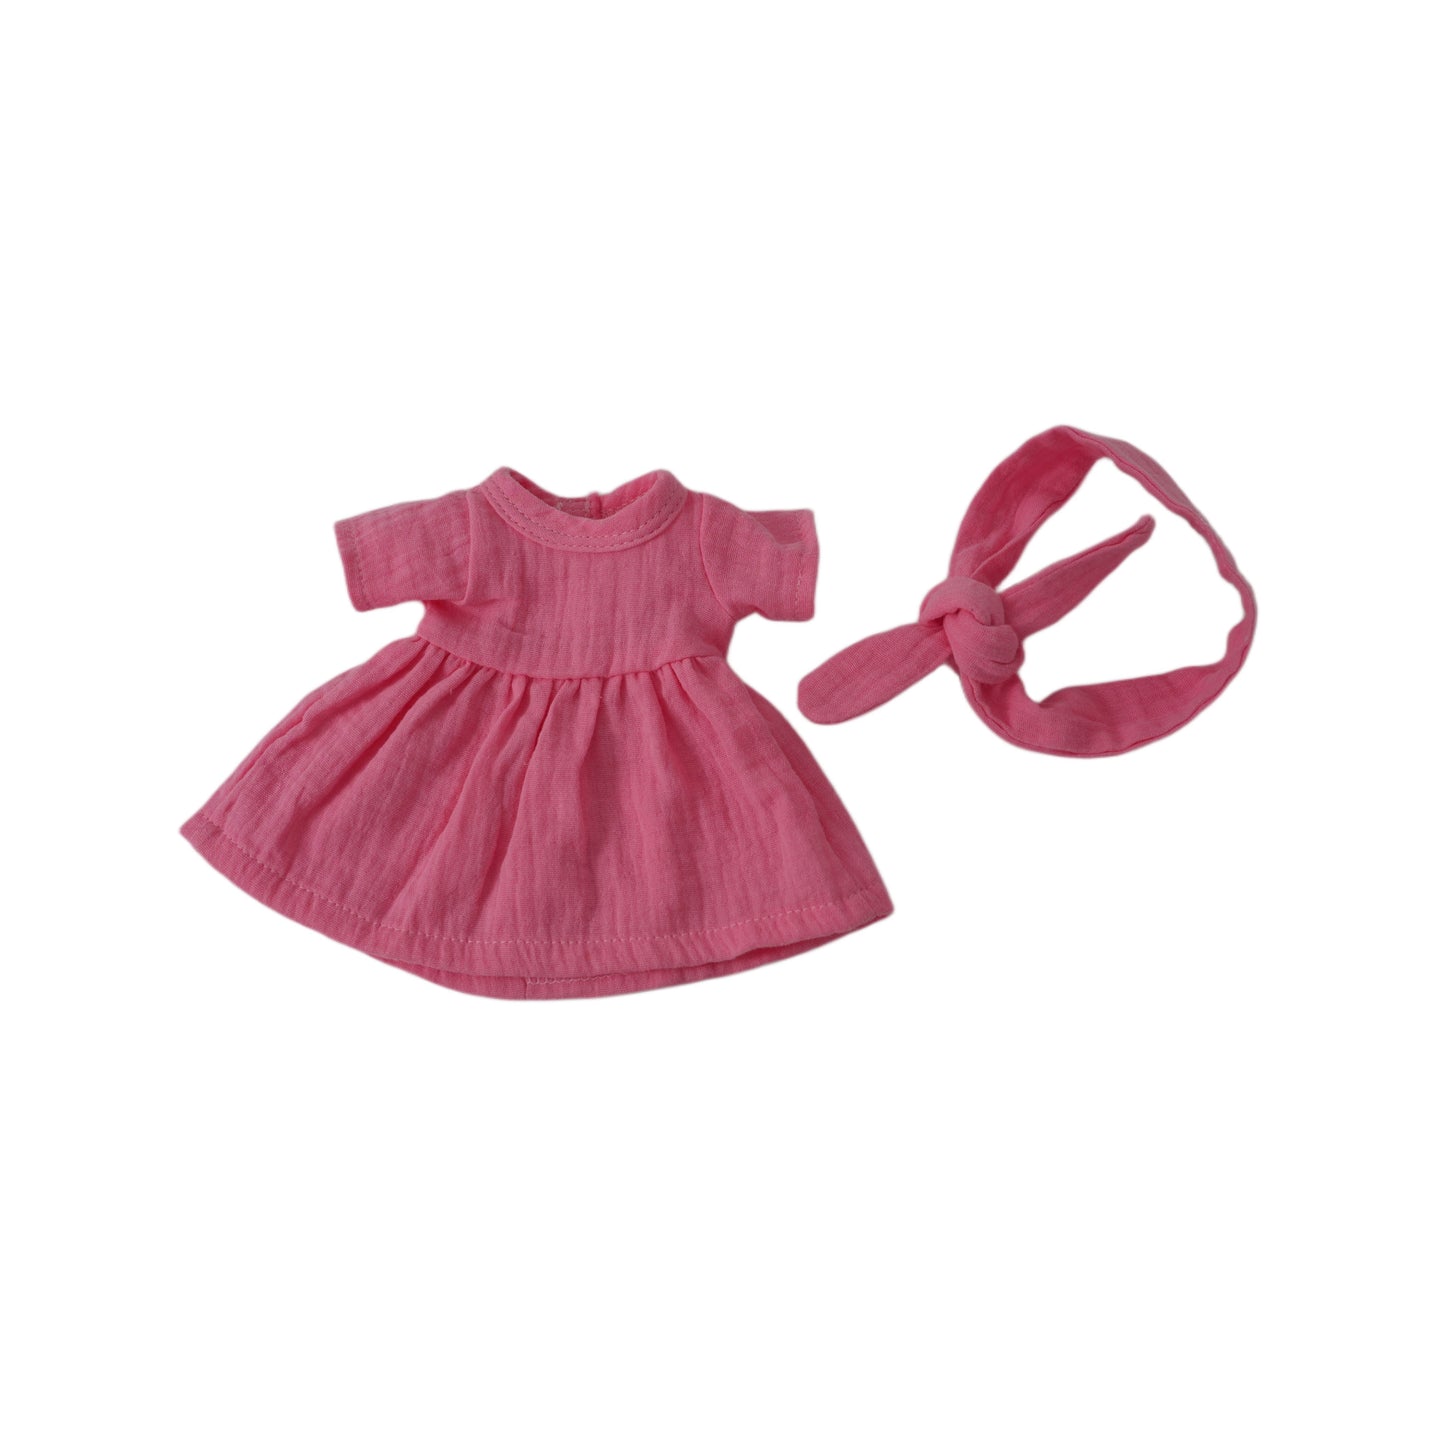 Doll Dresses 12-14 inch Baby Alive size Dress